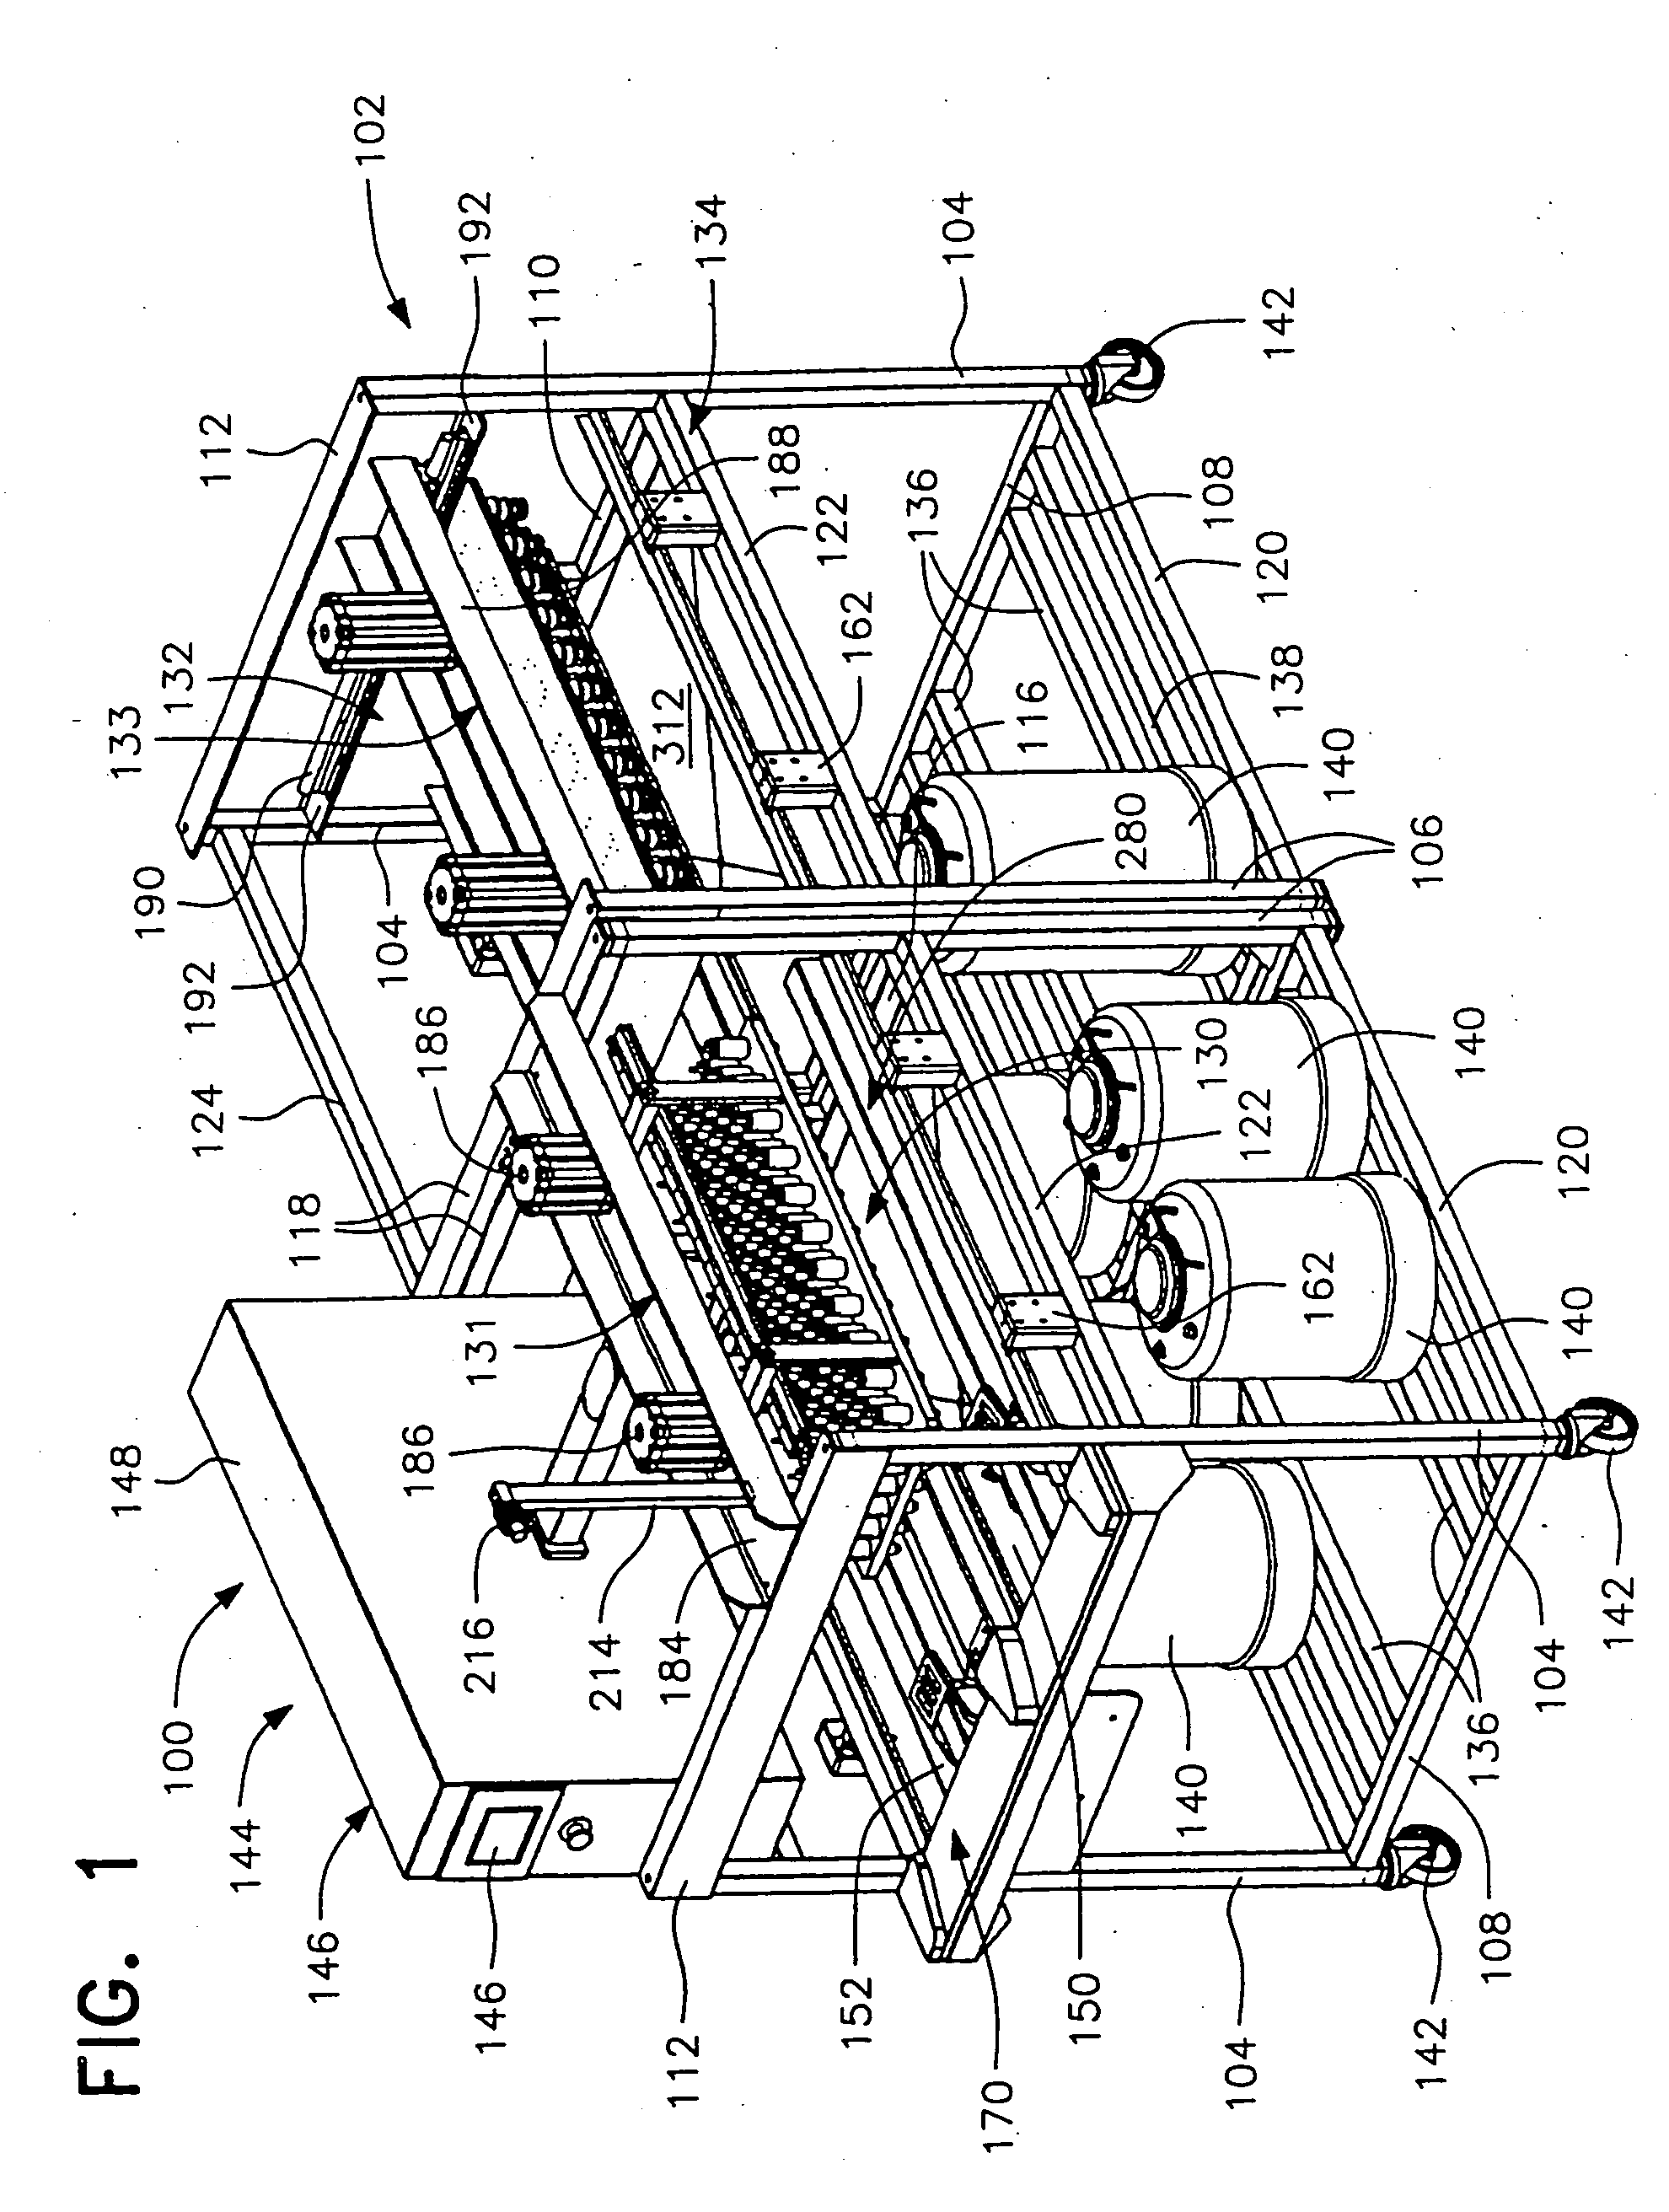 Automated egg injection machine and method